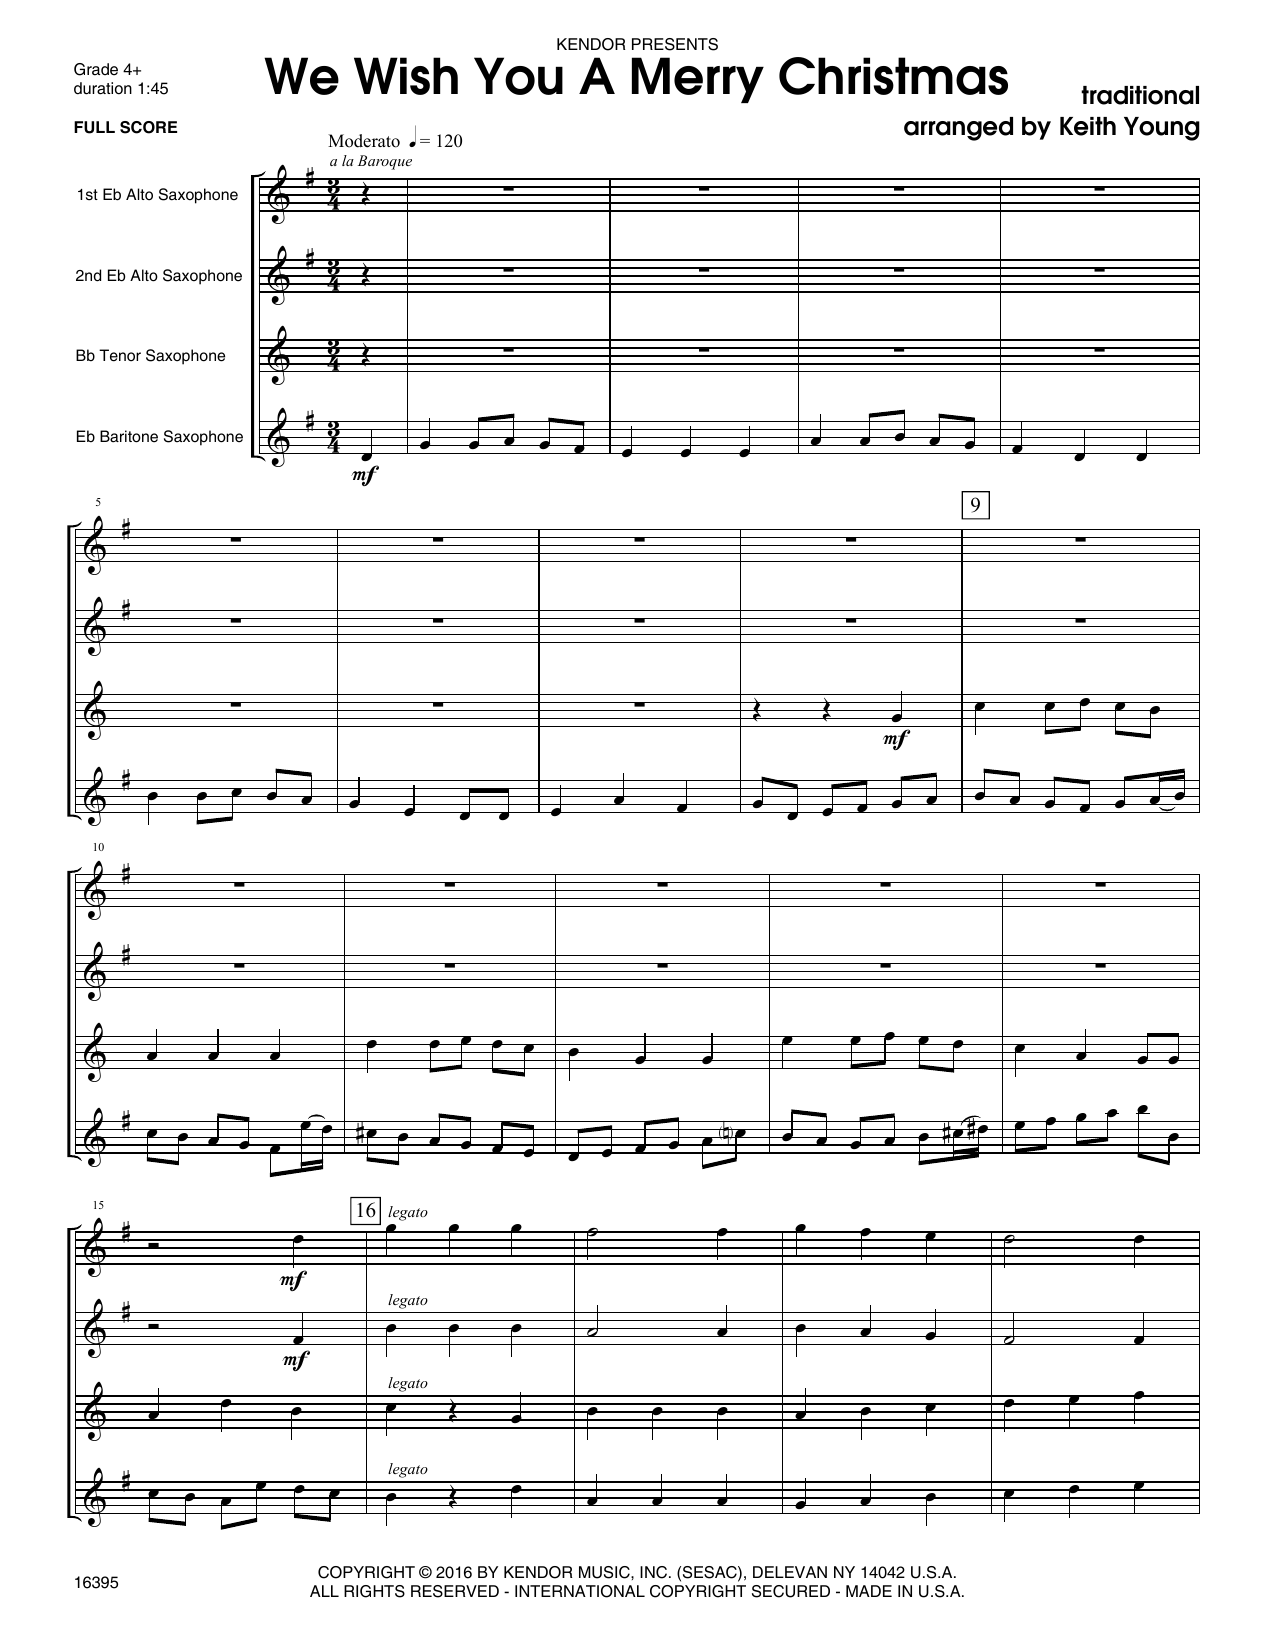 Download Keith Young We Wish You A Merry Christmas - Full Sc Sheet Music